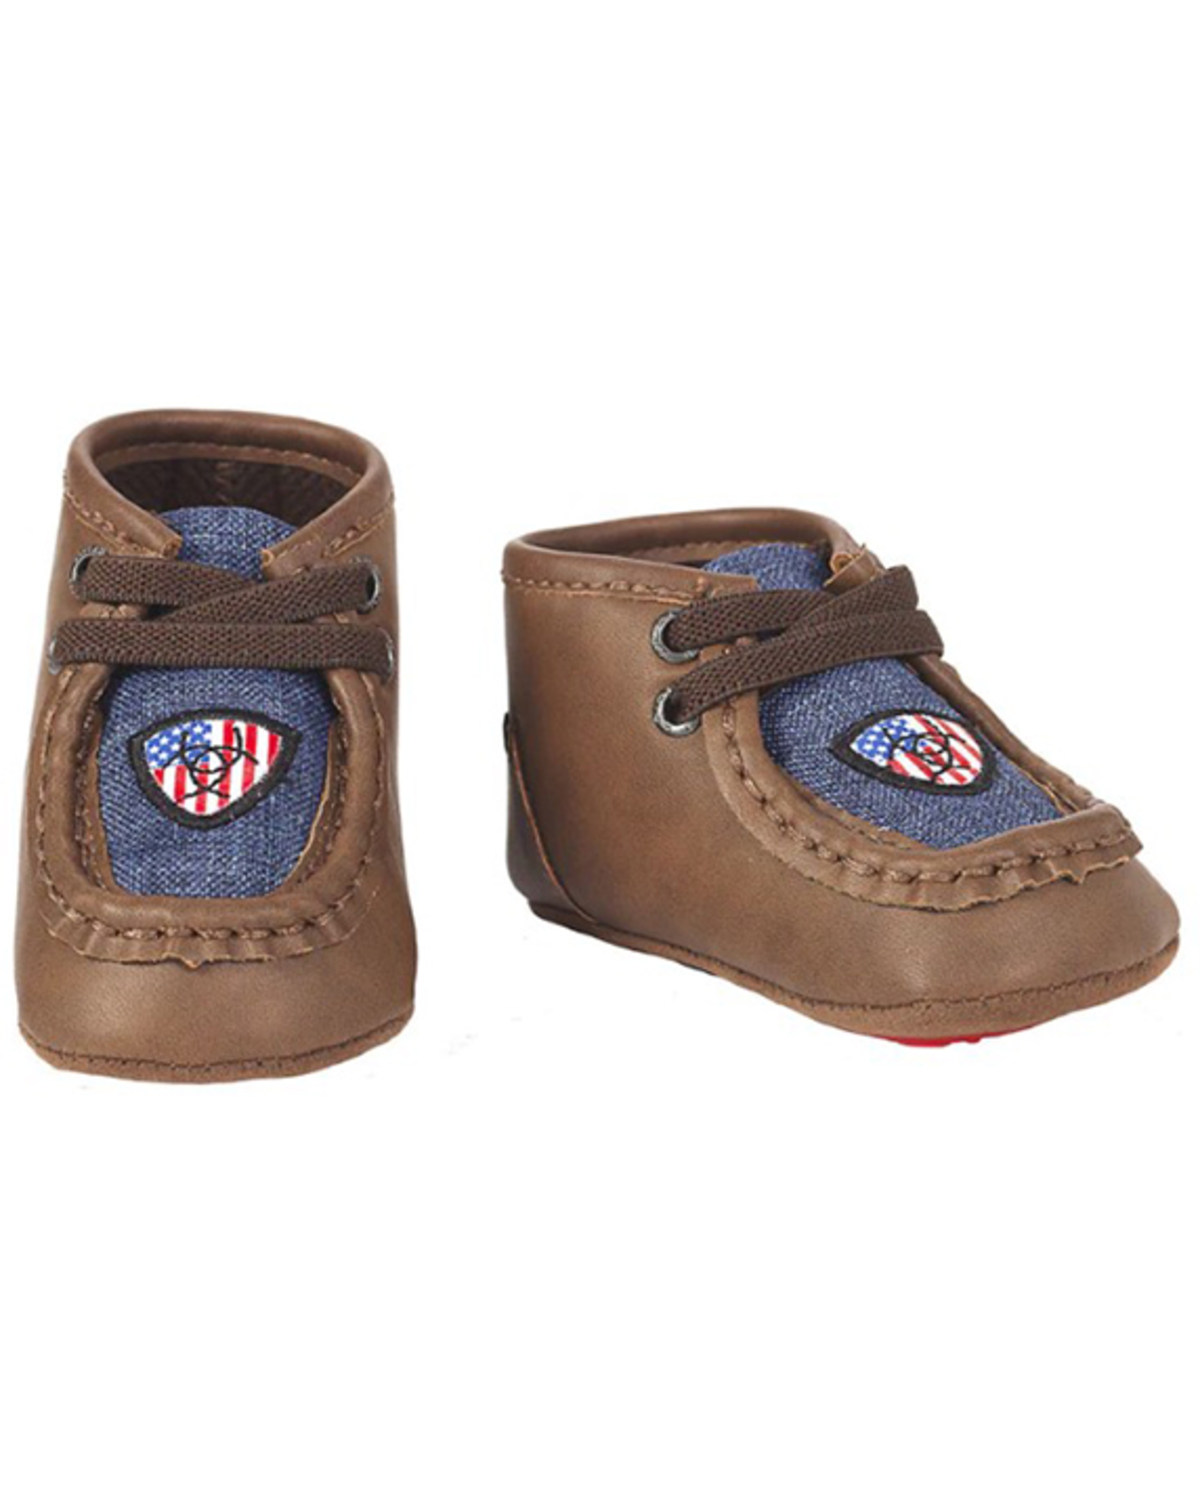 Ariat Infant-Boys' Lil Stomper Shelby Patriotic Chukka Shoes